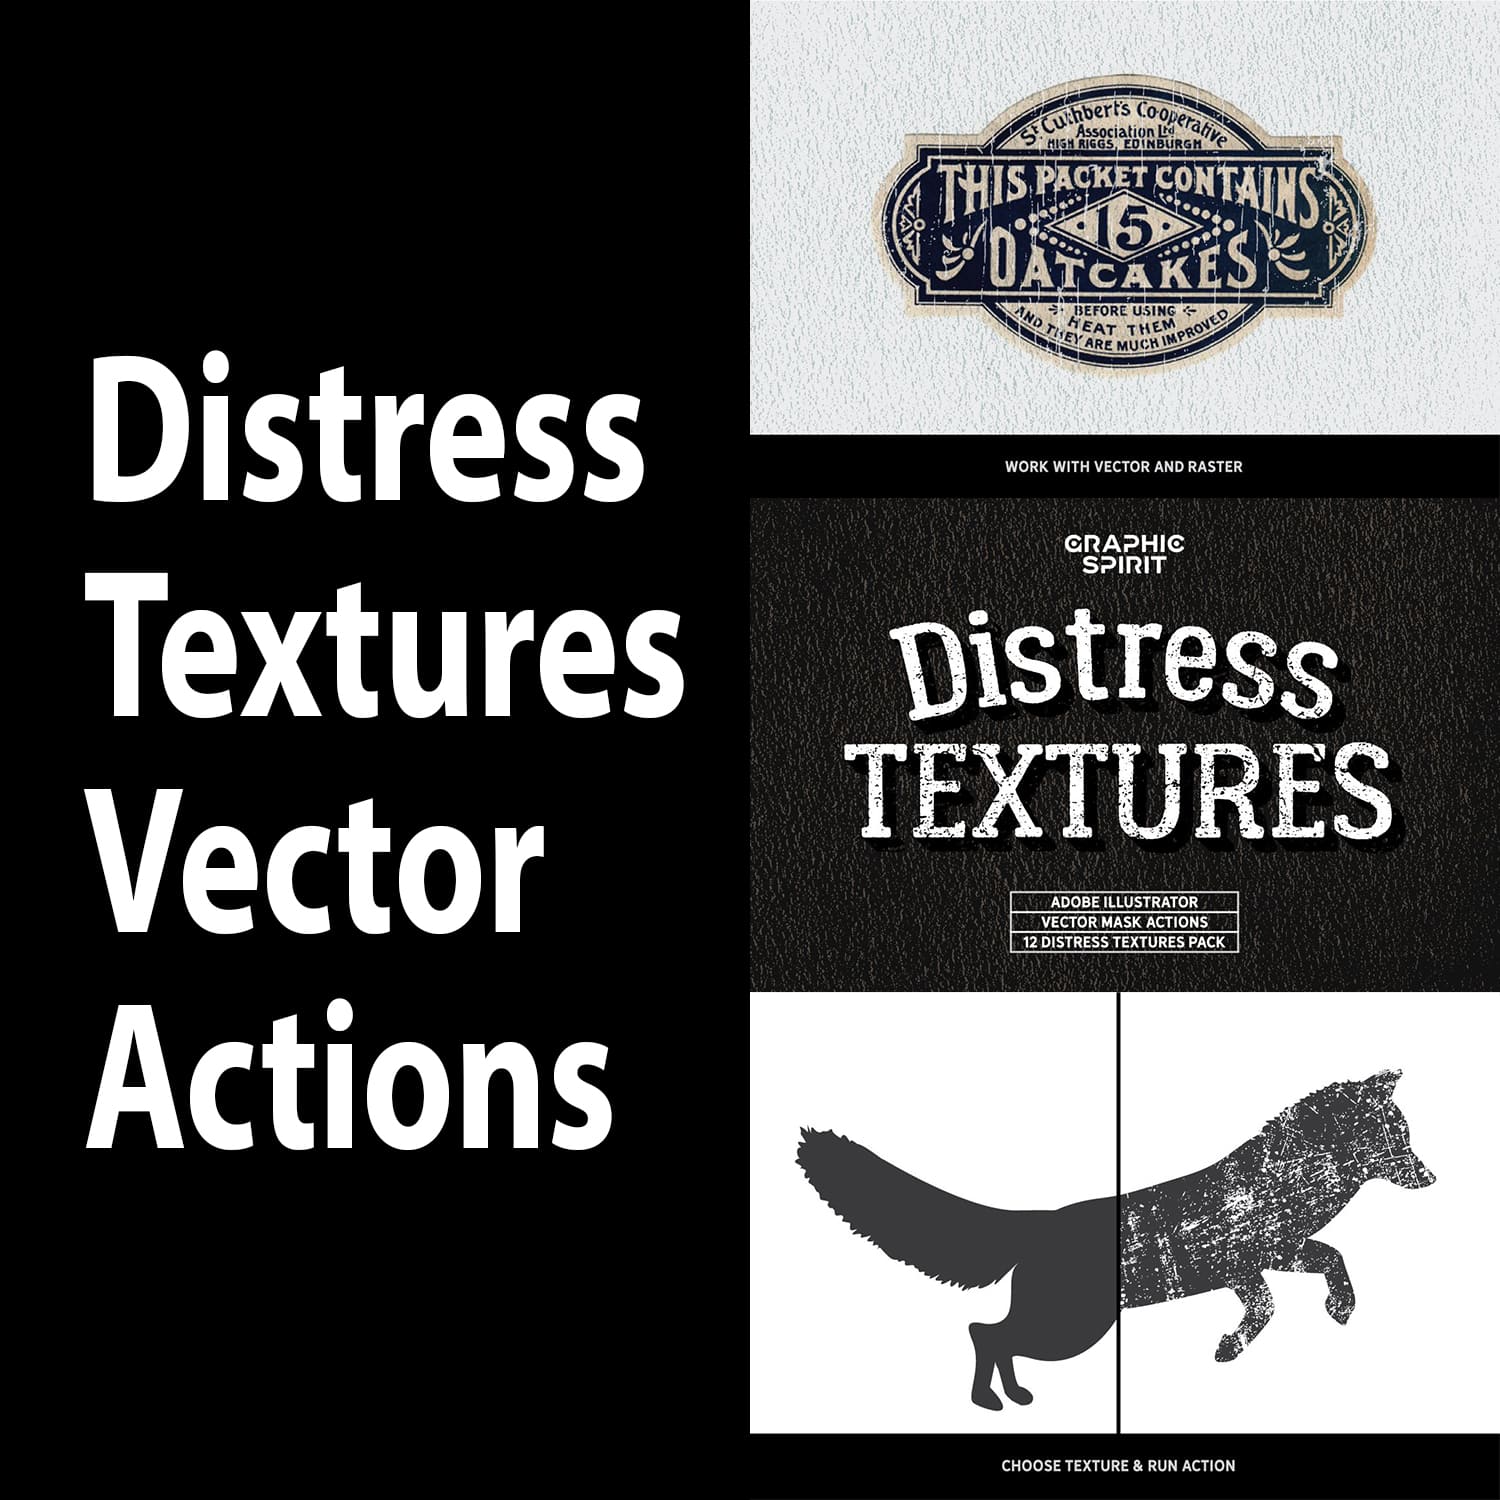 Distress Textures Vector Actions by MasterBundles Collage Image.